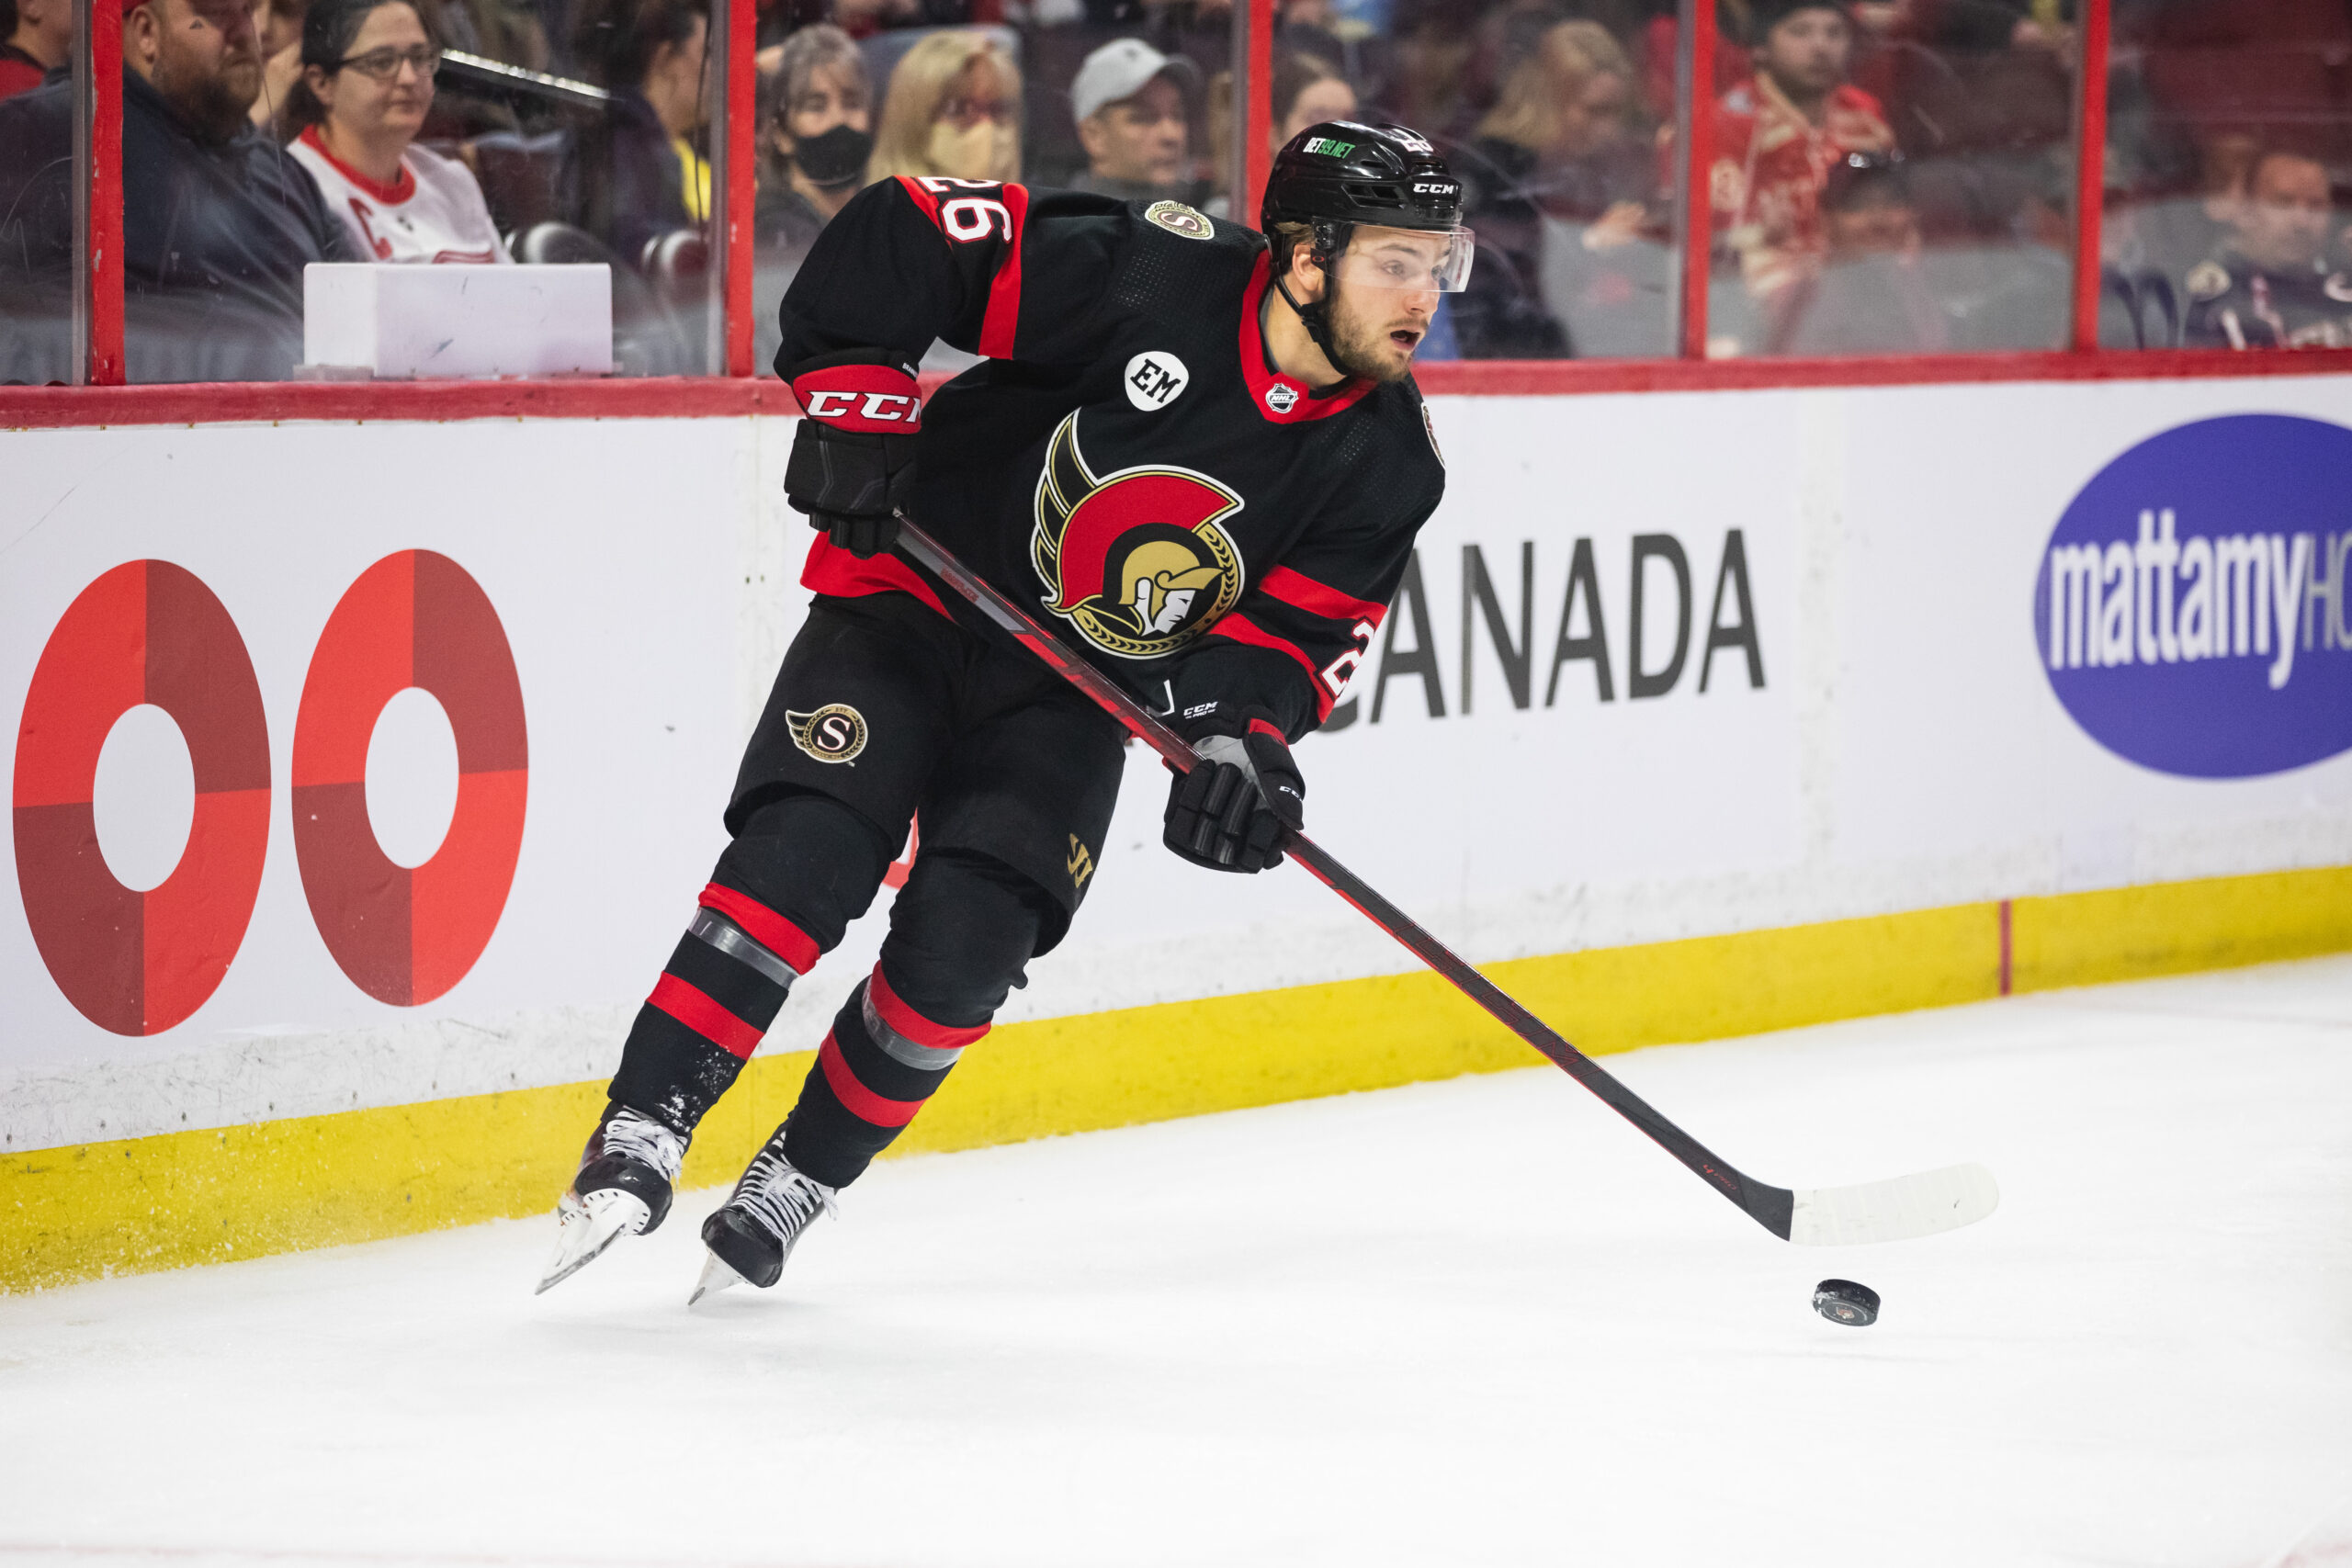 A more focused Thomas Chabot keys in on securing spot with Senators